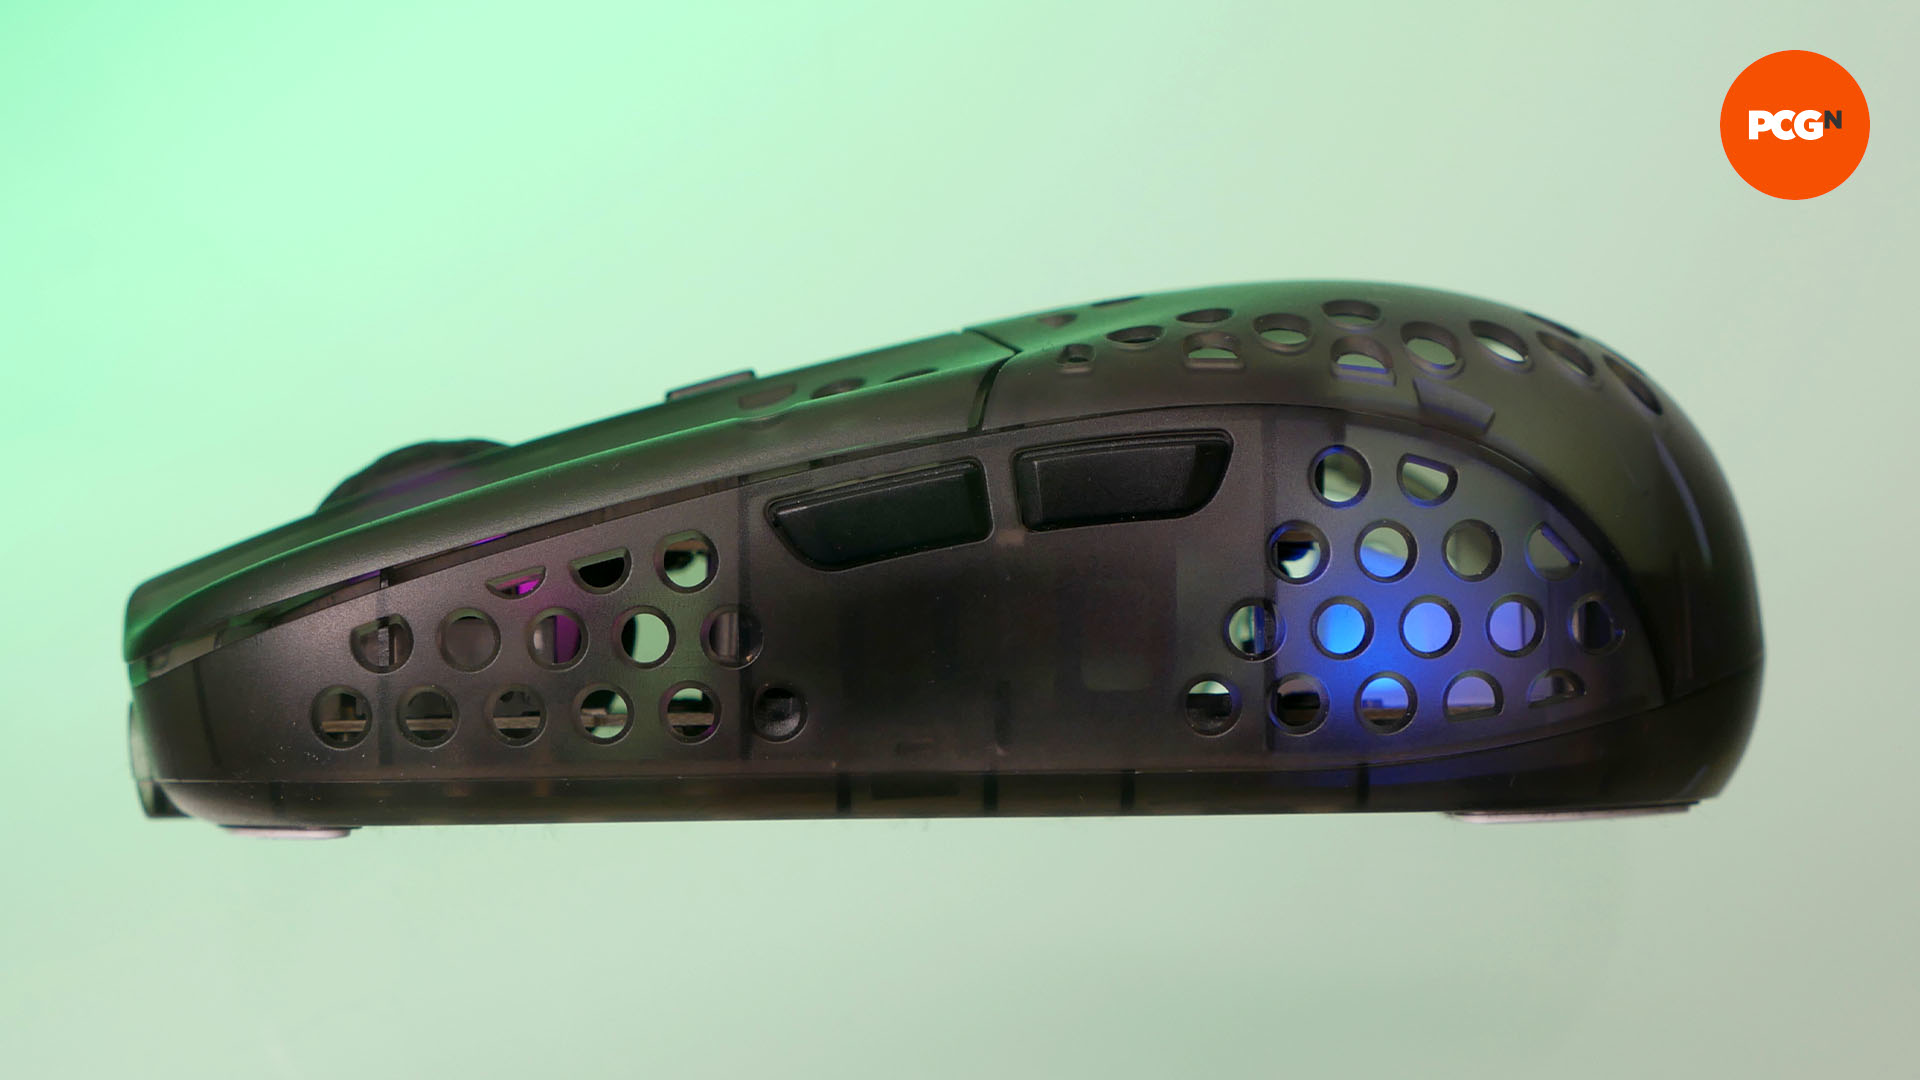 A side profile of the cherry xtrfy mz1 wireless mouse